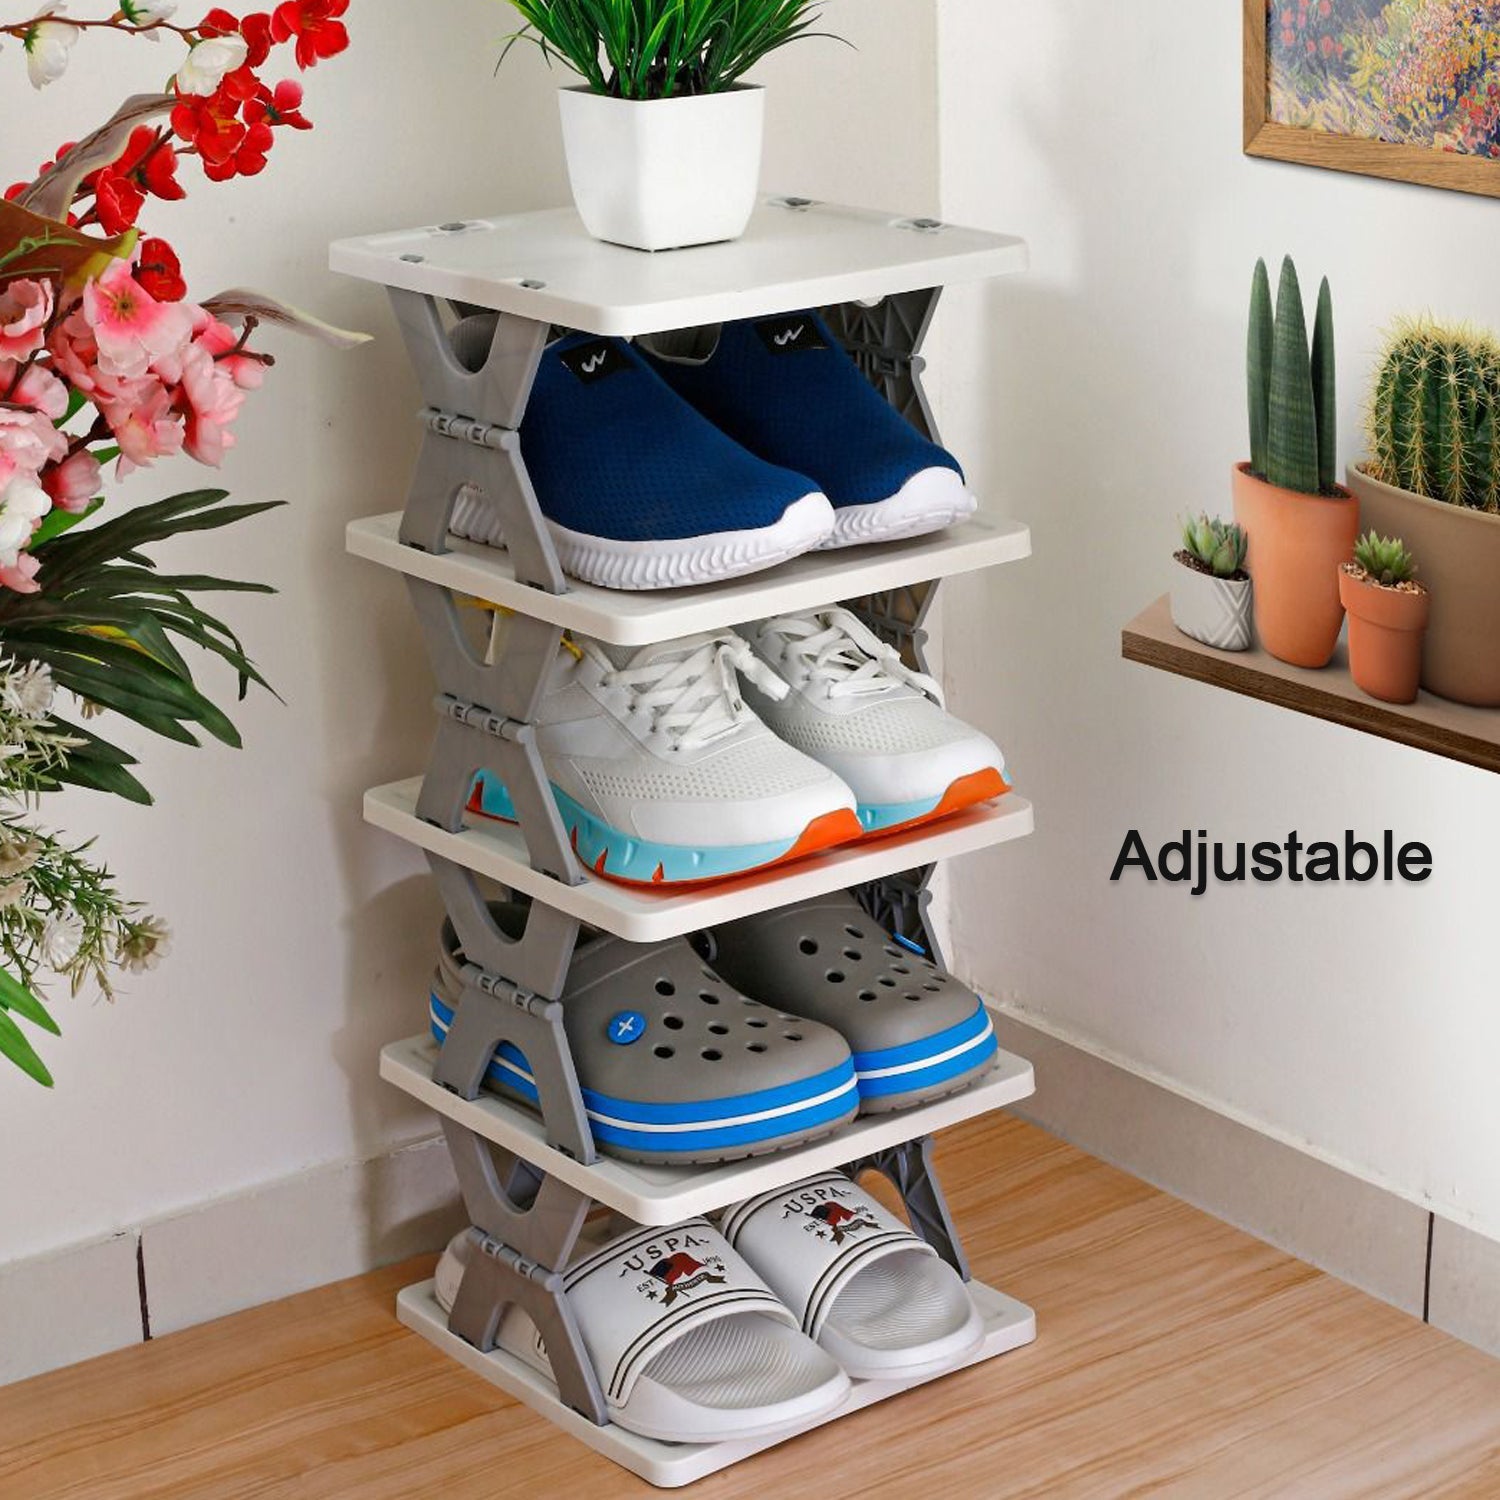 SMART SHOE RACK WITH 8 LAYER SHOES STAND MULTIFUNCTIONAL ENTRYWAY FOLDABLE & COLLAPSIBLE DOOR SHOE RACK FREE STANDING HEAVY DUTY PLASTIC SHOE SHELF STORAGE ORGANIZER NARROW FOOTWEAR HOME